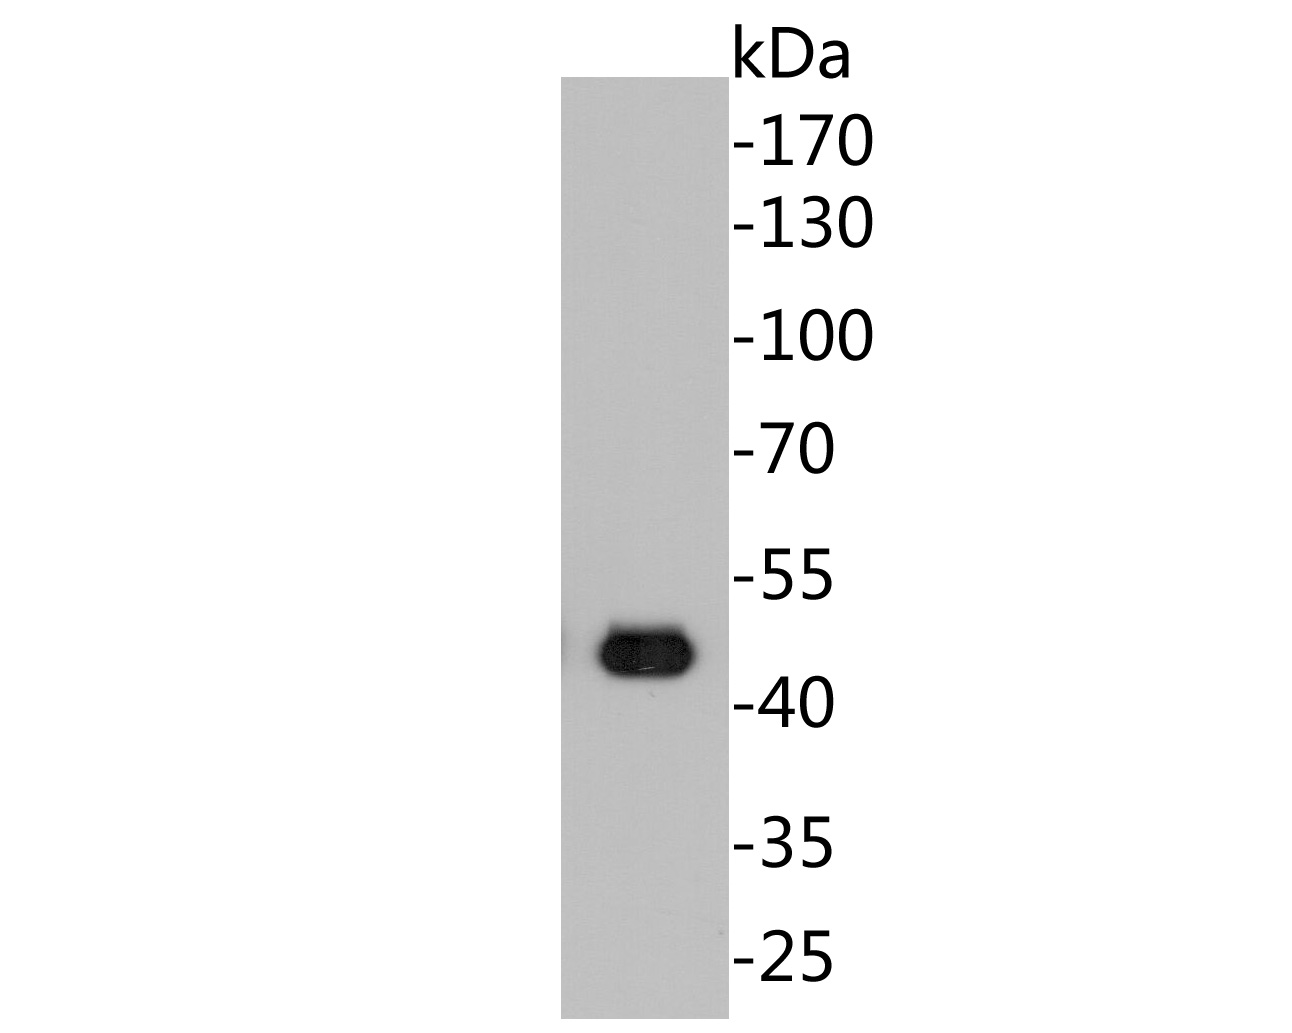 Western blot analysis of Cytokeratin 20 on Lovo cell lysates. Proteins were transferred to a PVDF membrane and blocked with 5% BSA in PBS for 1 hour at room temperature. The primary antibody (EM1901-96, 1/500) was used in 5% BSA at room temperature for 2 hours. Goat Anti-Mouse IgG - HRP Secondary Antibody (HA1006) at 1:5,000 dilution was used for 1 hour at room temperature.